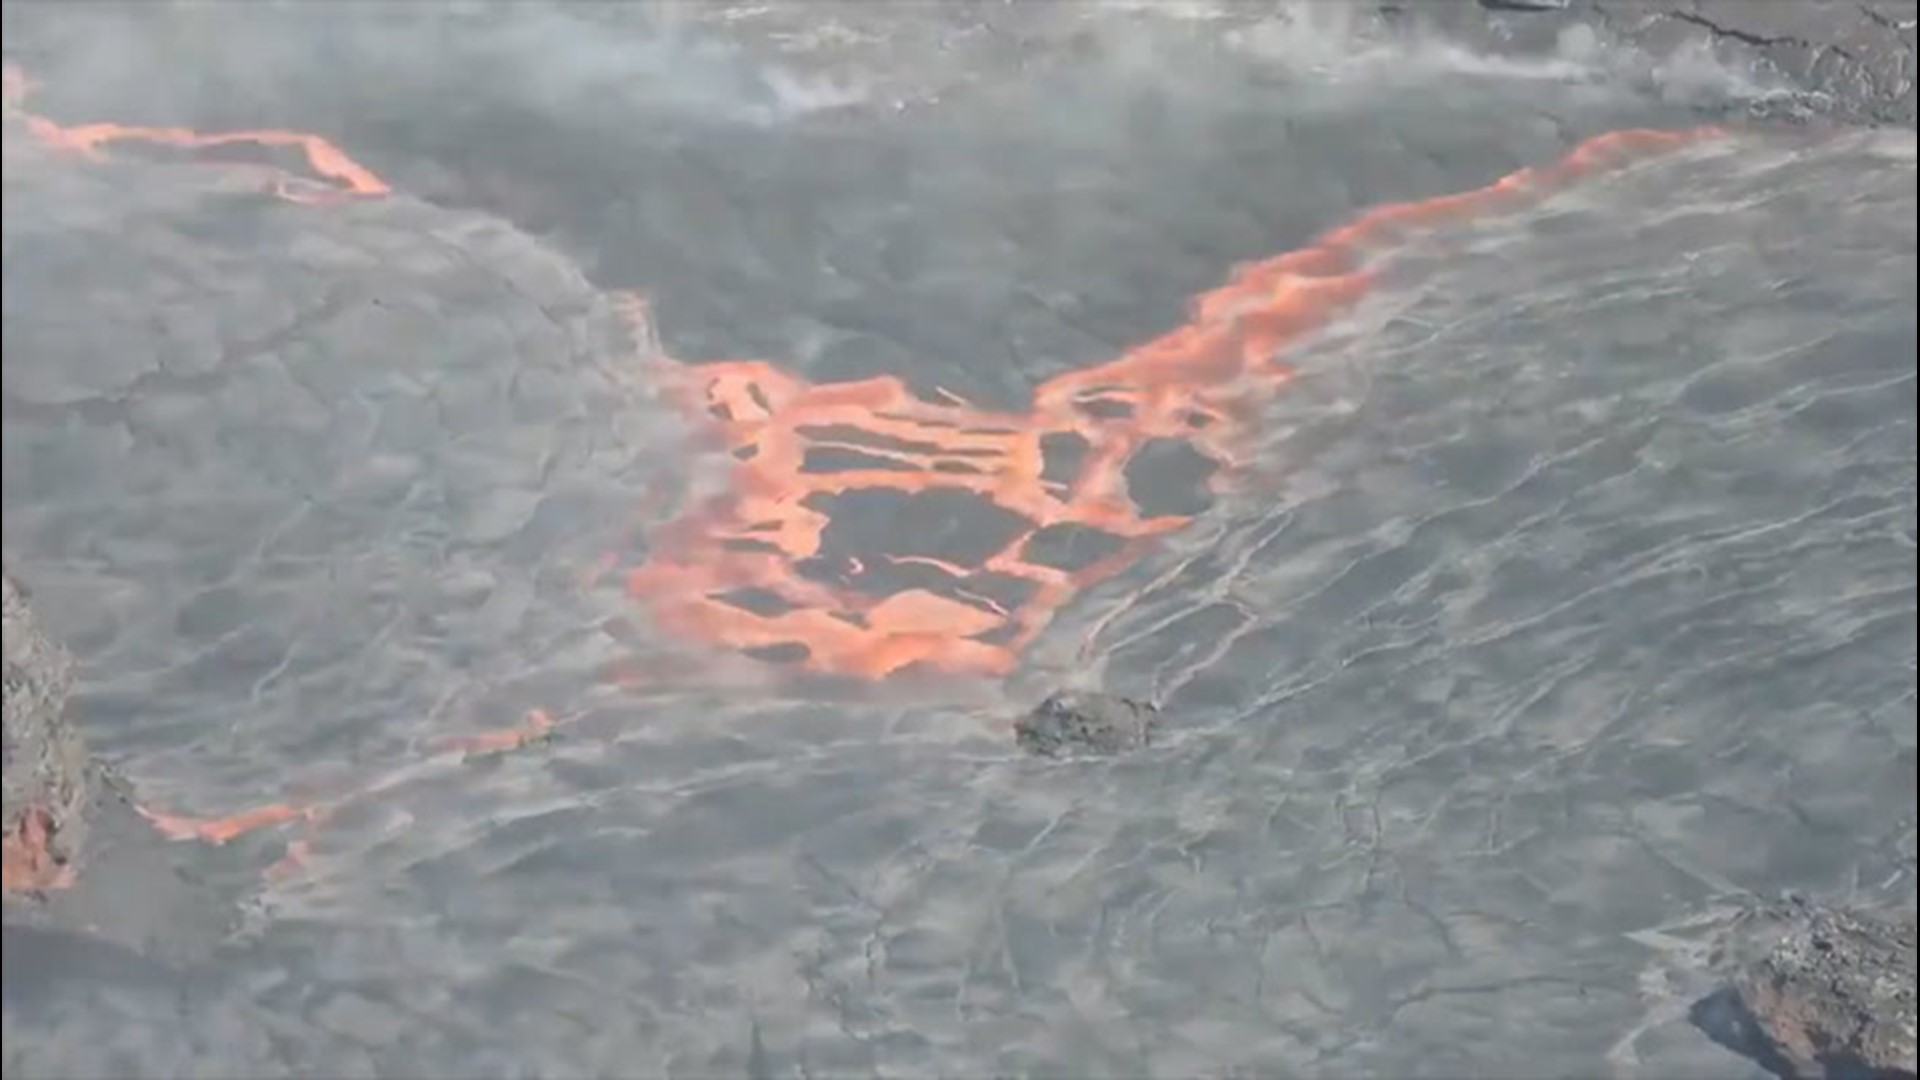 Mt. Kīlauea, which has been steadily erupting since late December, is continually forming a new crust at the surface of its lava lake at Halemaʻumaʻu.